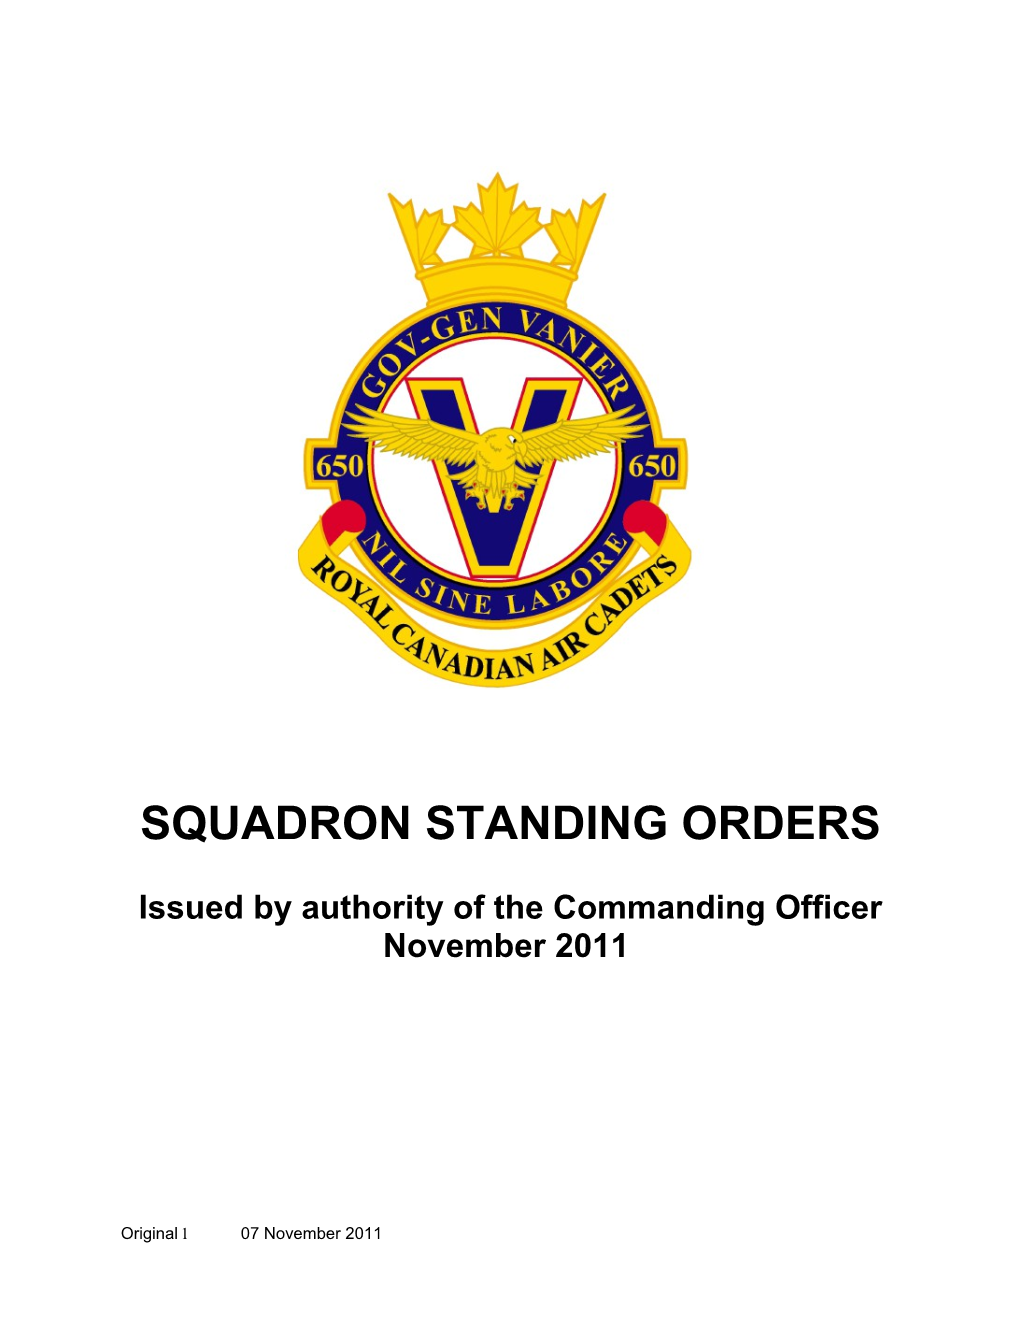 Issued by Authority of the Commanding Officer